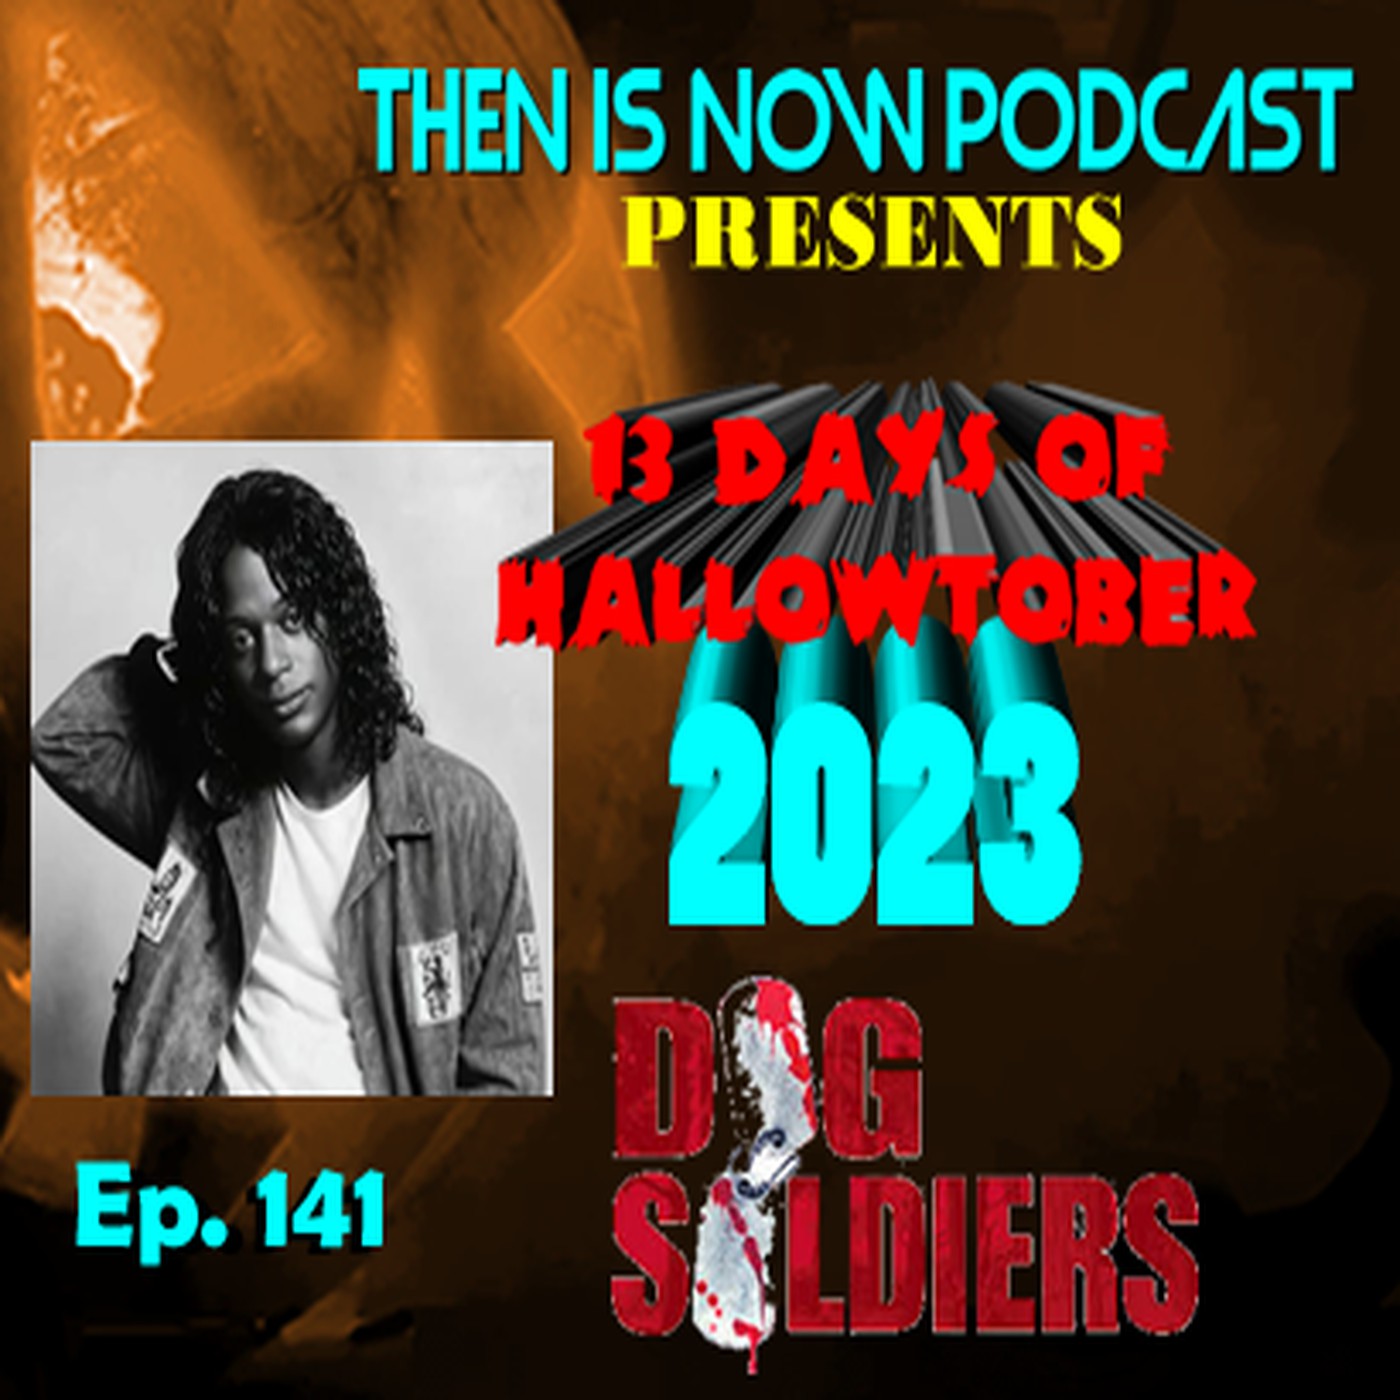 Then Is Now Ep.  141 - 13 Days of Hallowtober 2023 - Dog Soldiers (2002)